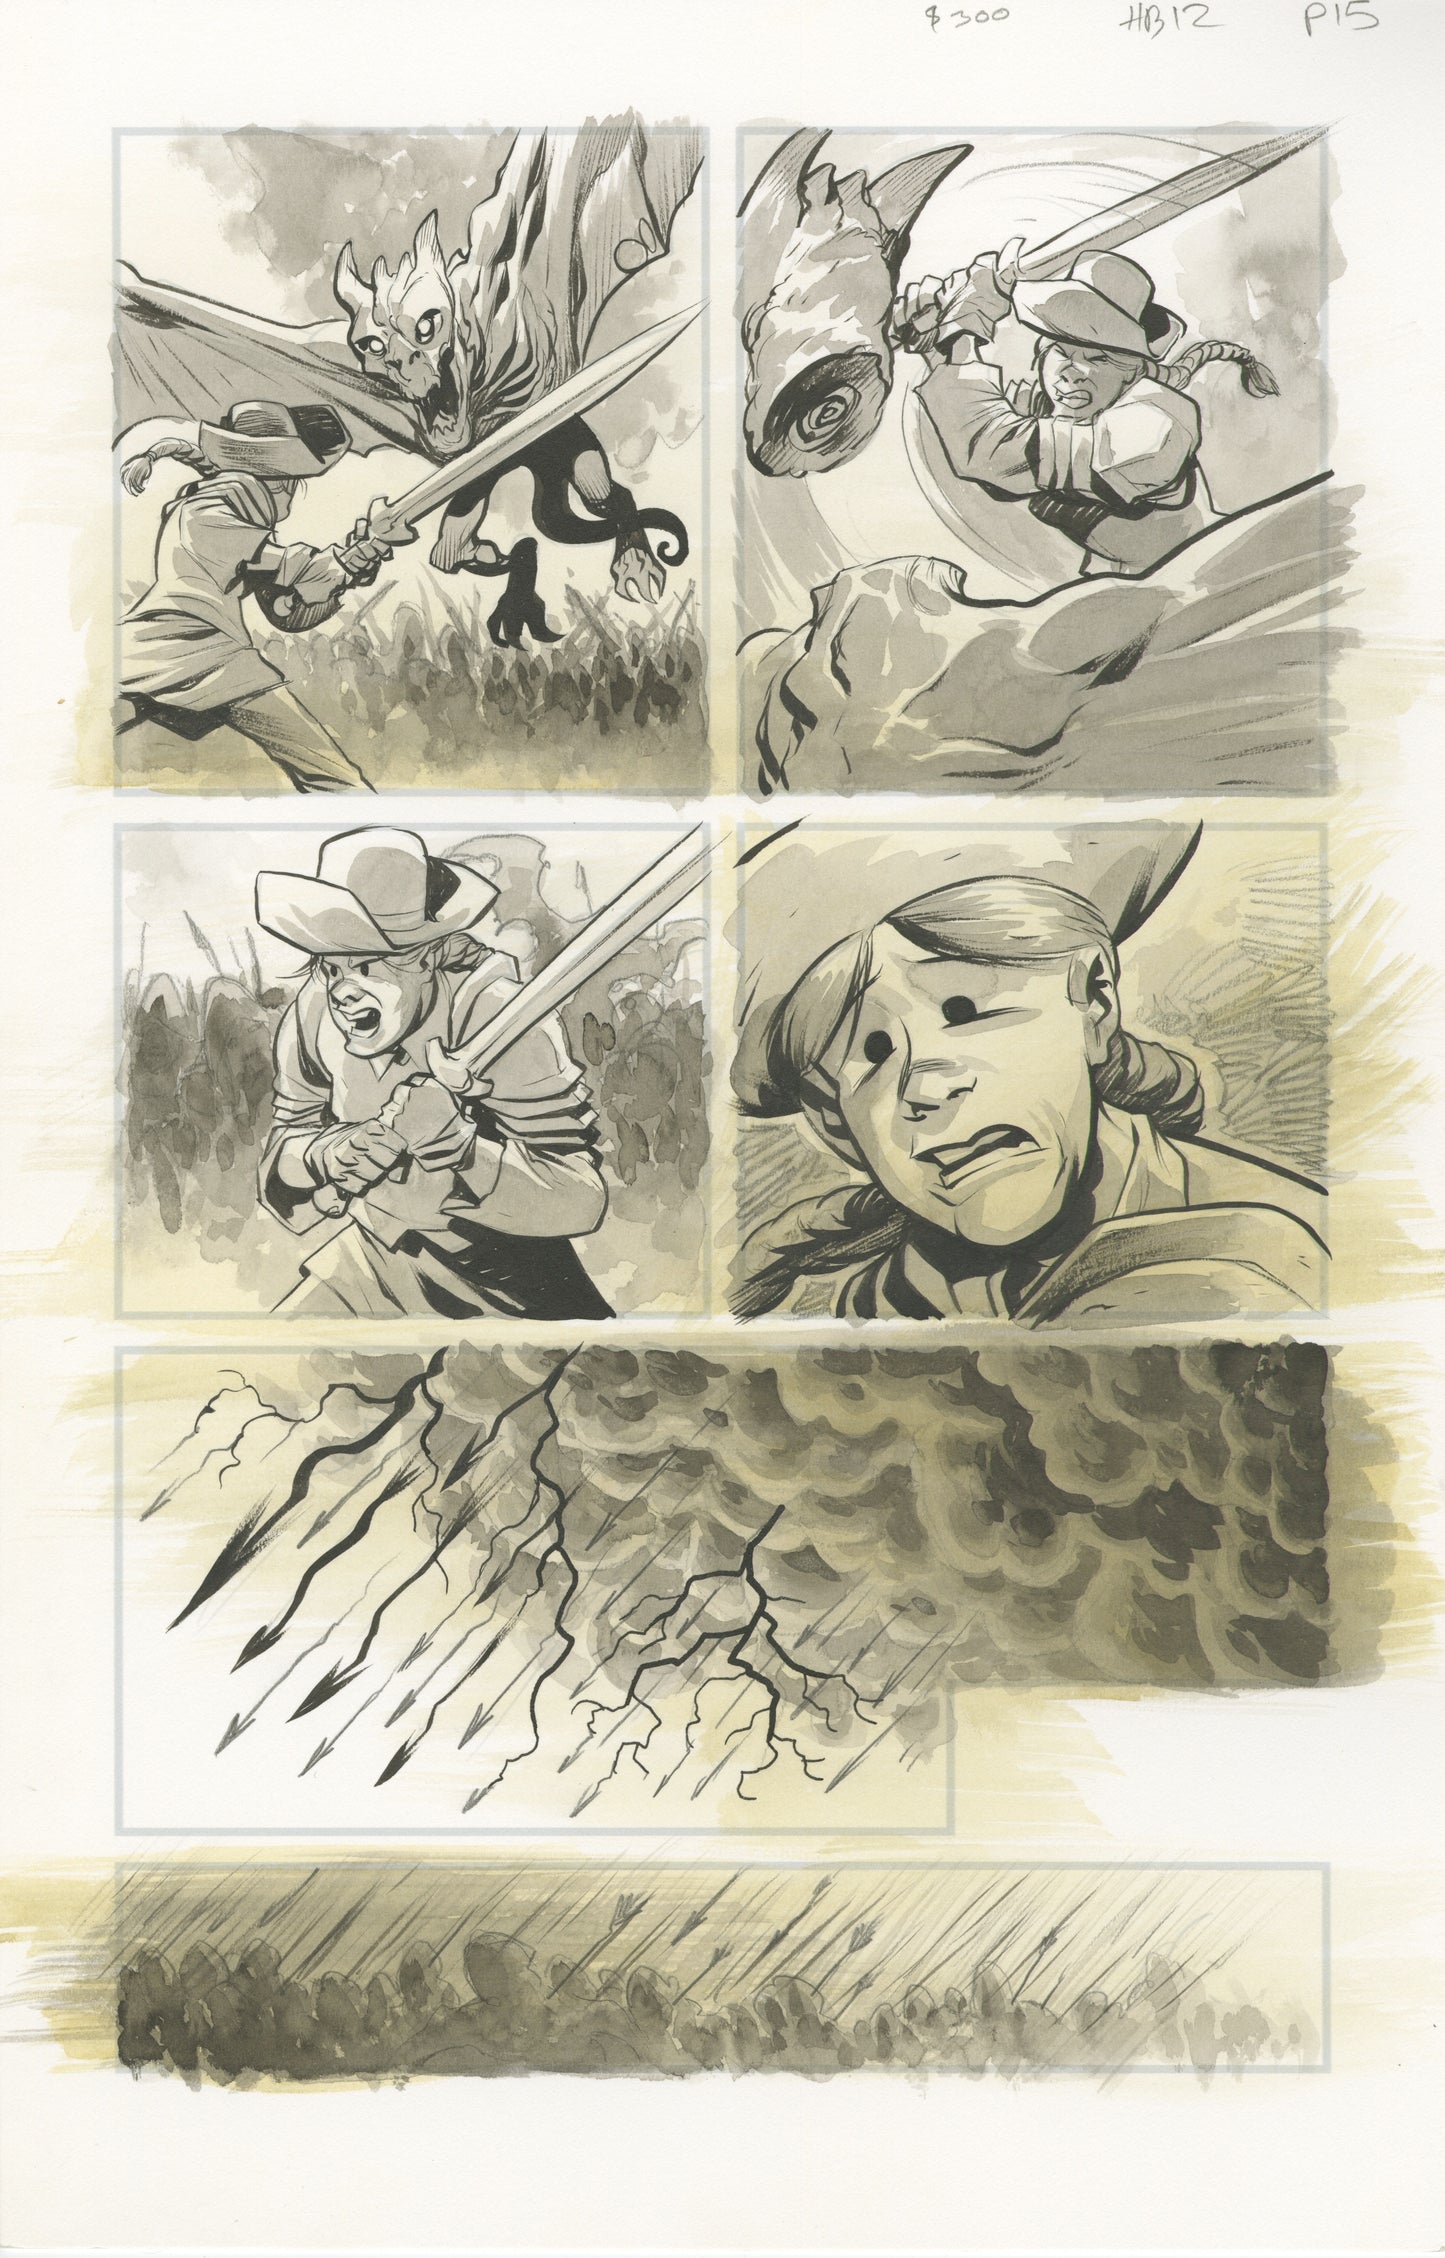 Hillbilly #12, page #15